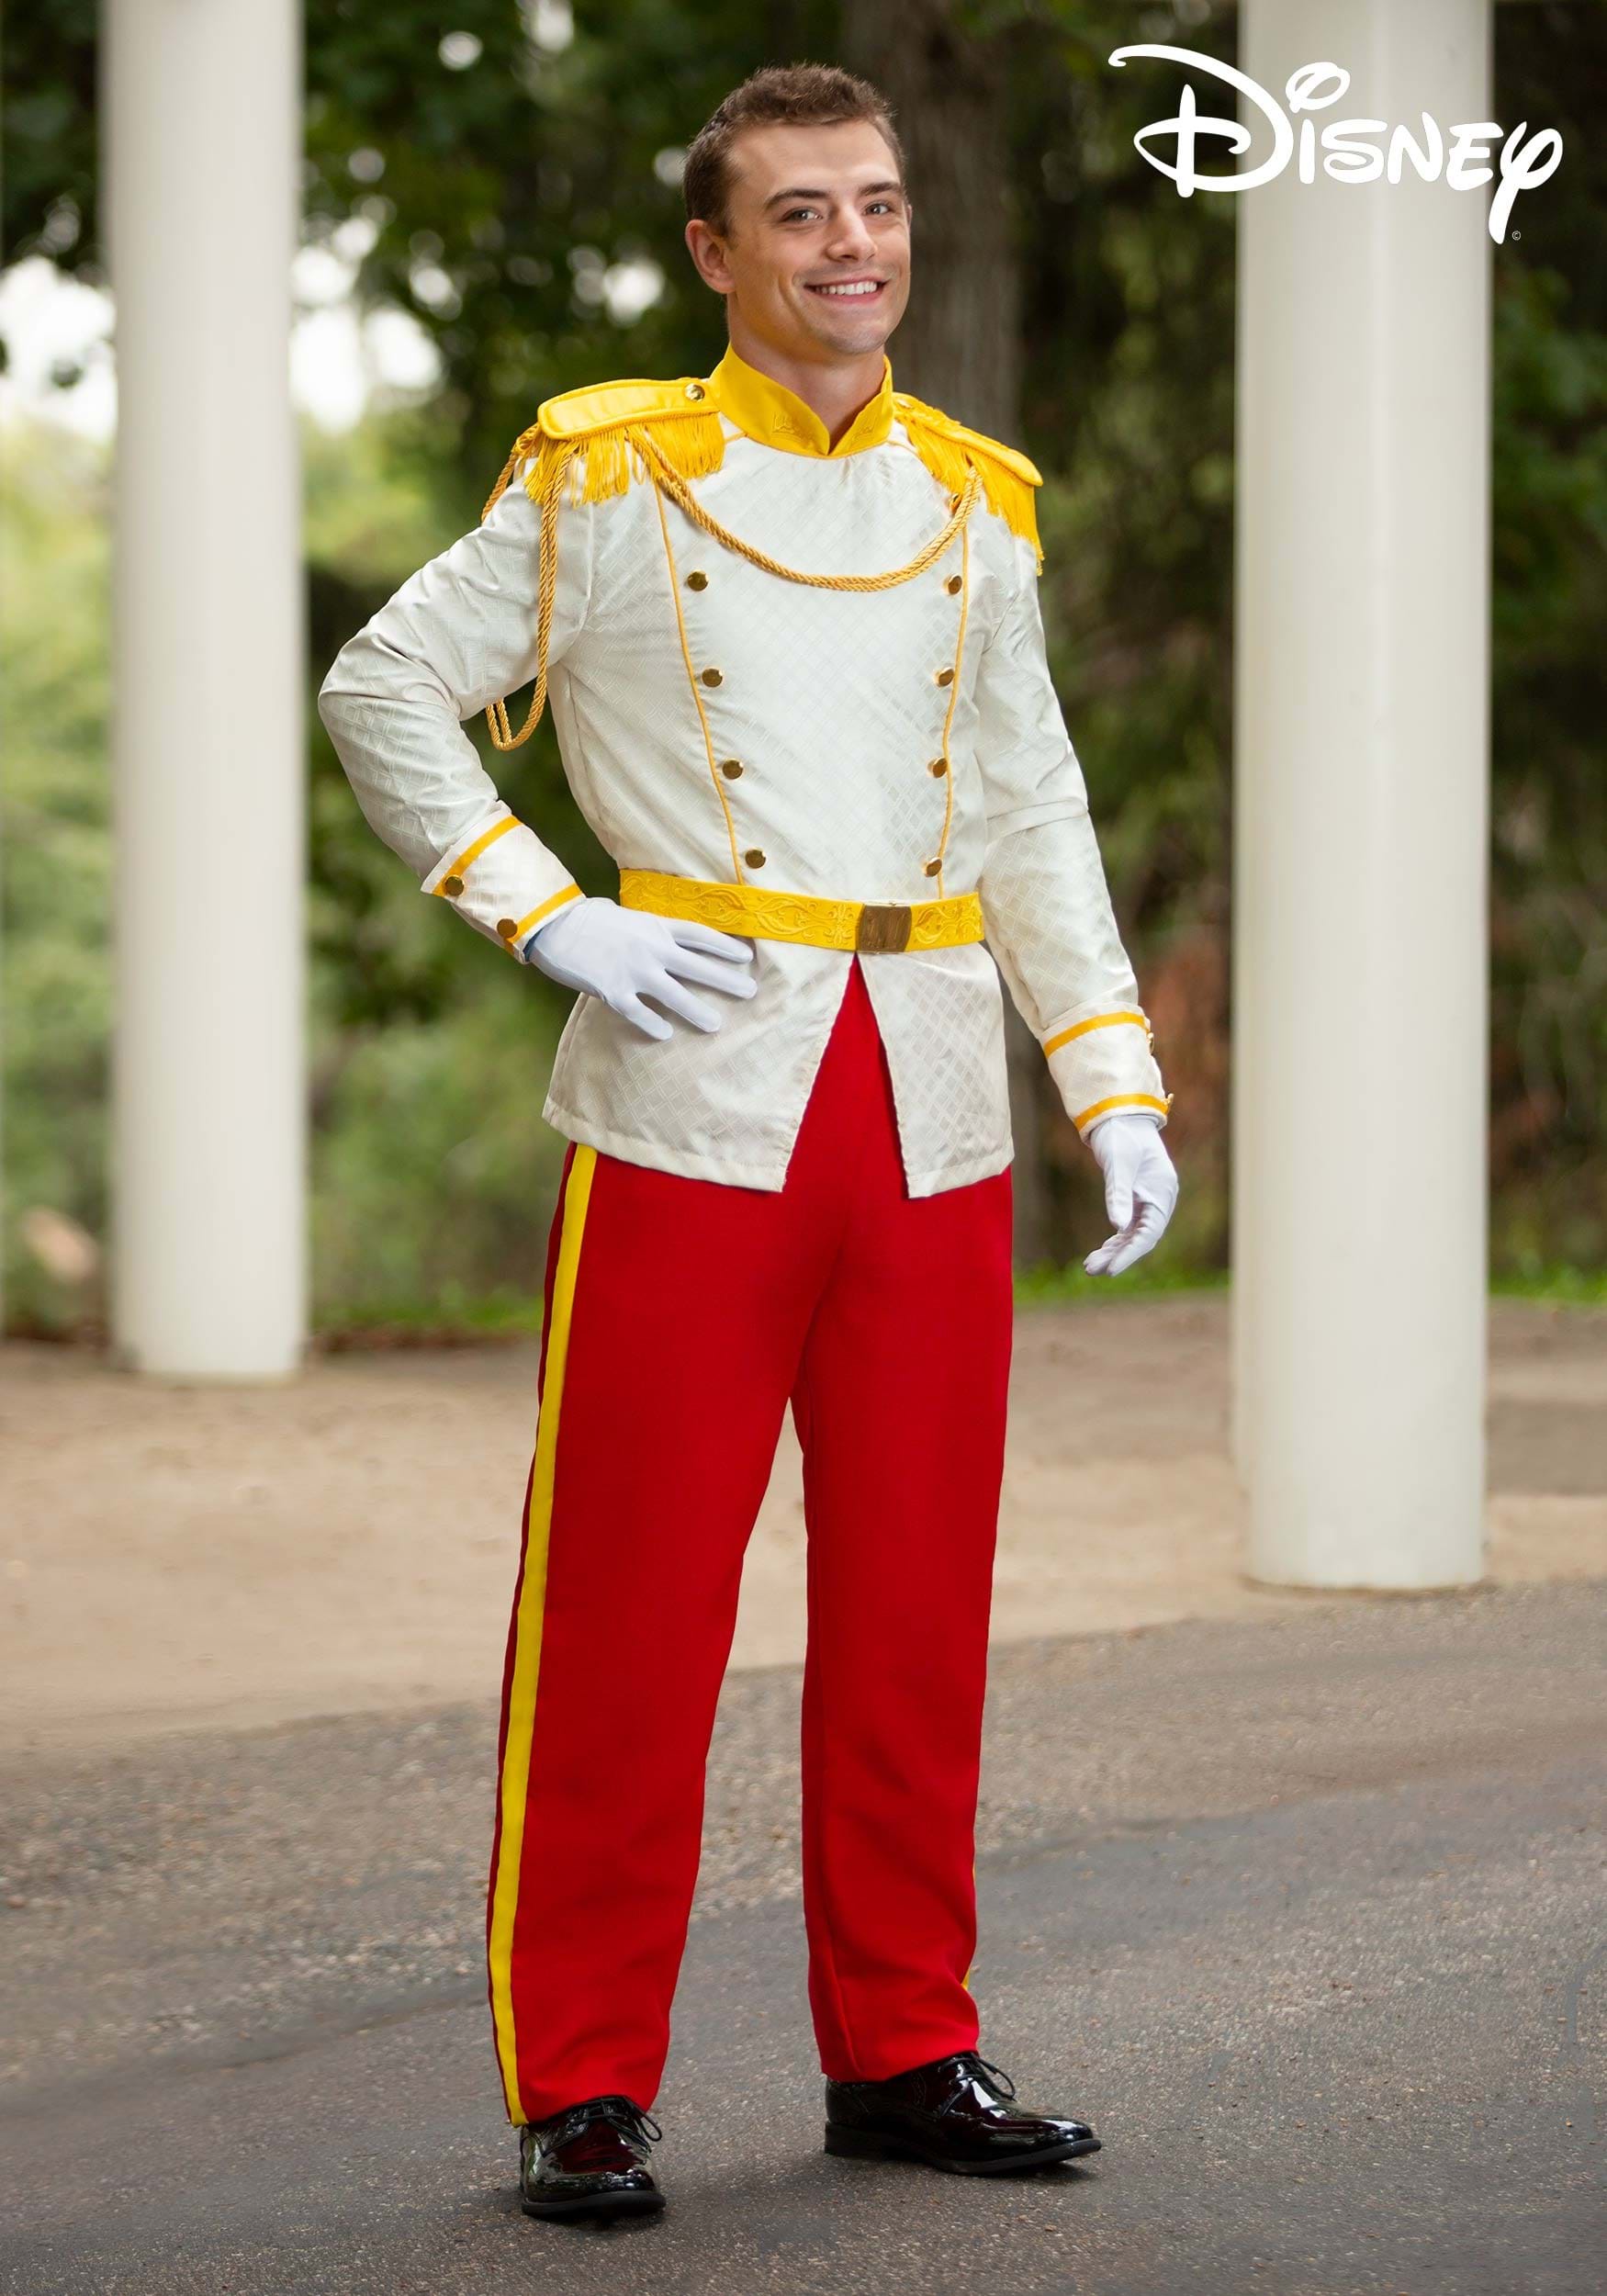 Cinderella Prince Charming Cosplay Costume Outfits High Quality And Comfortable 